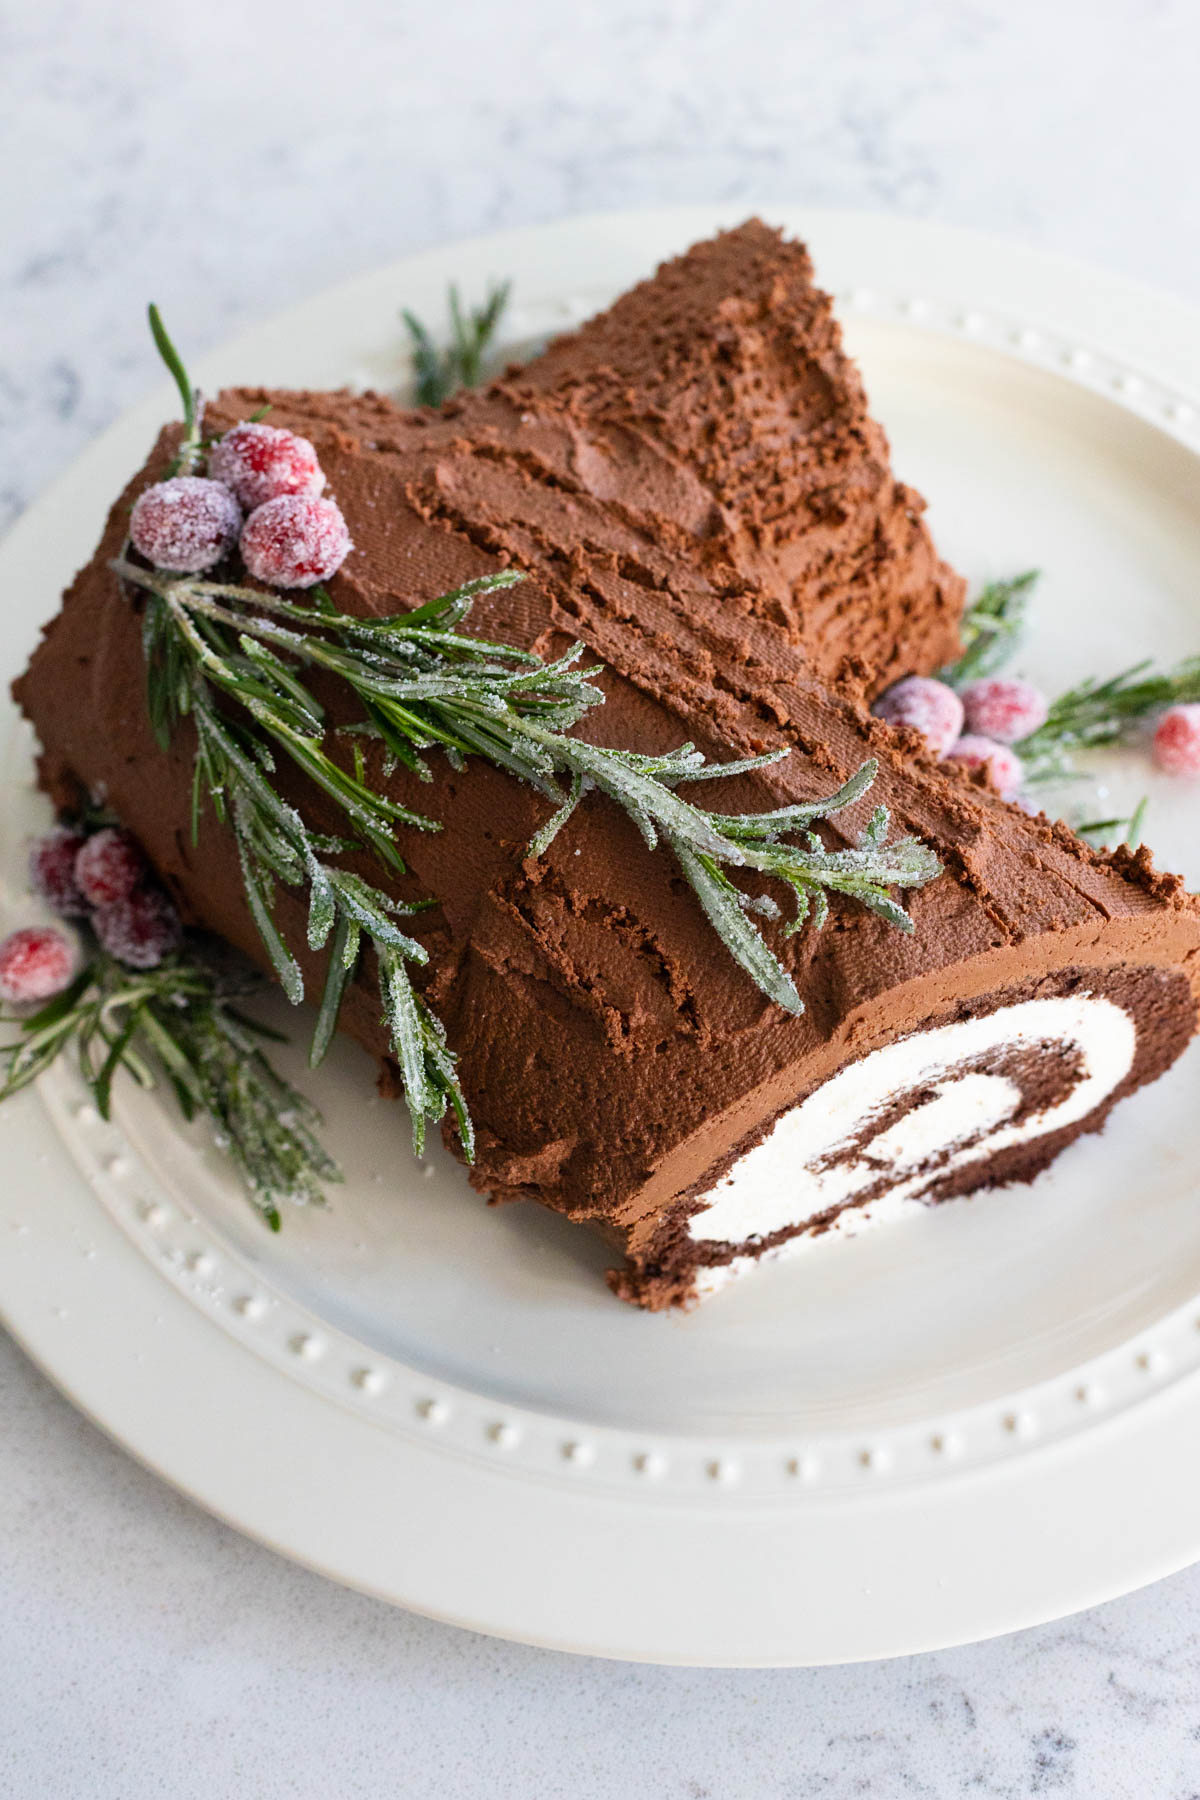 The finished yule log cake sits on a cake plate with sugared cranberries and rosemary.